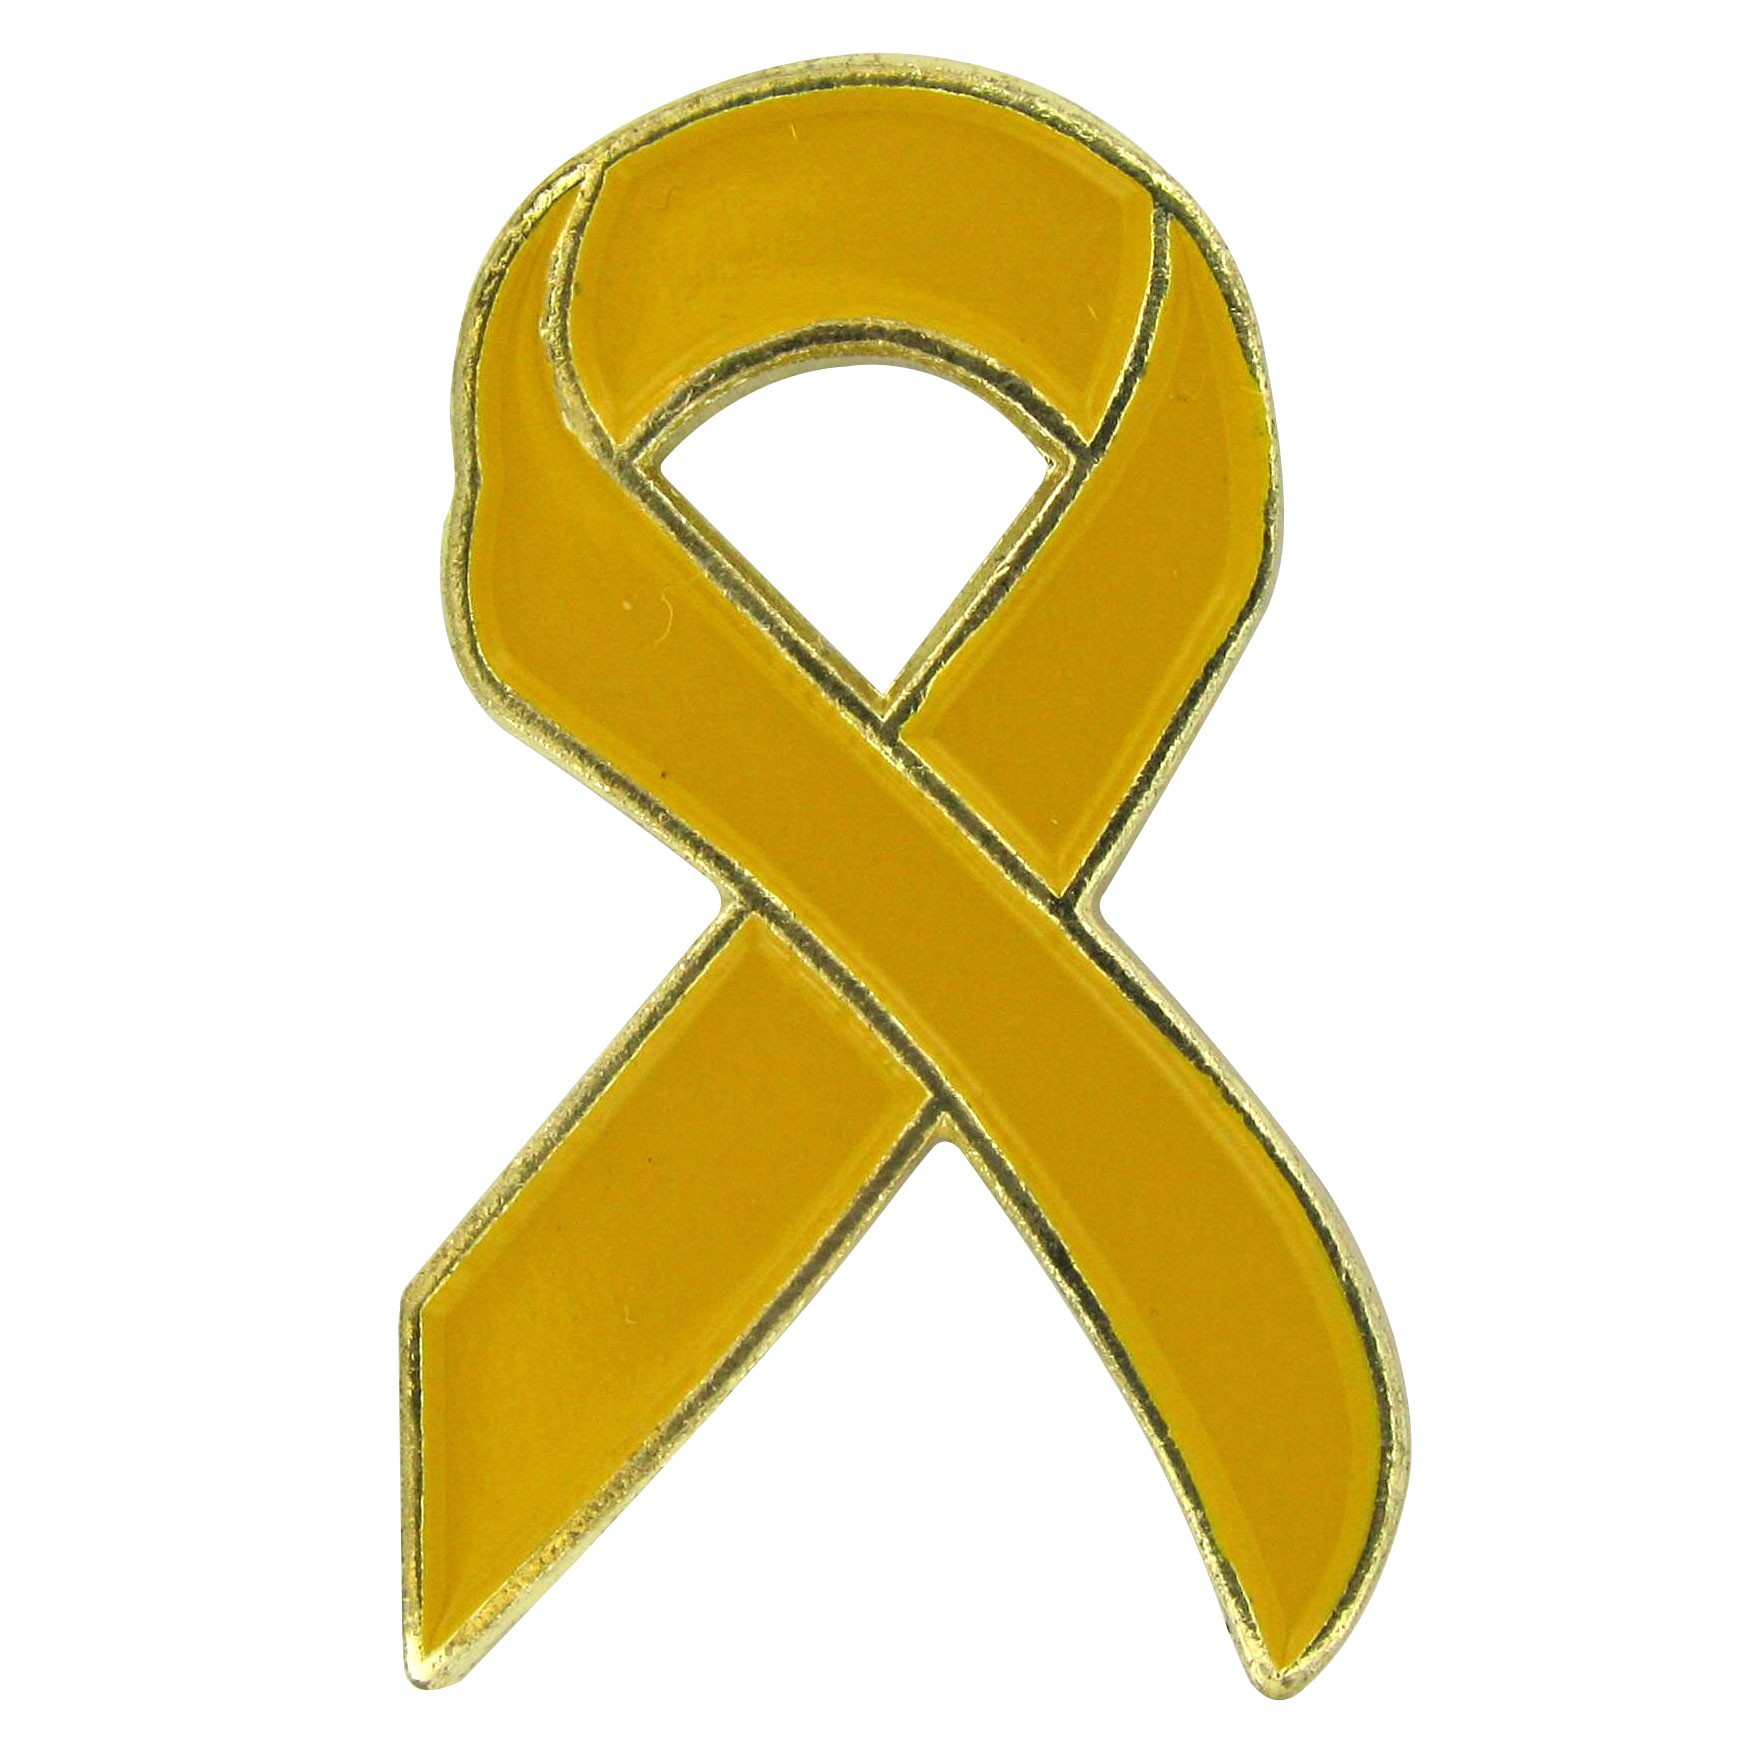 yellow bow clipart - photo #47